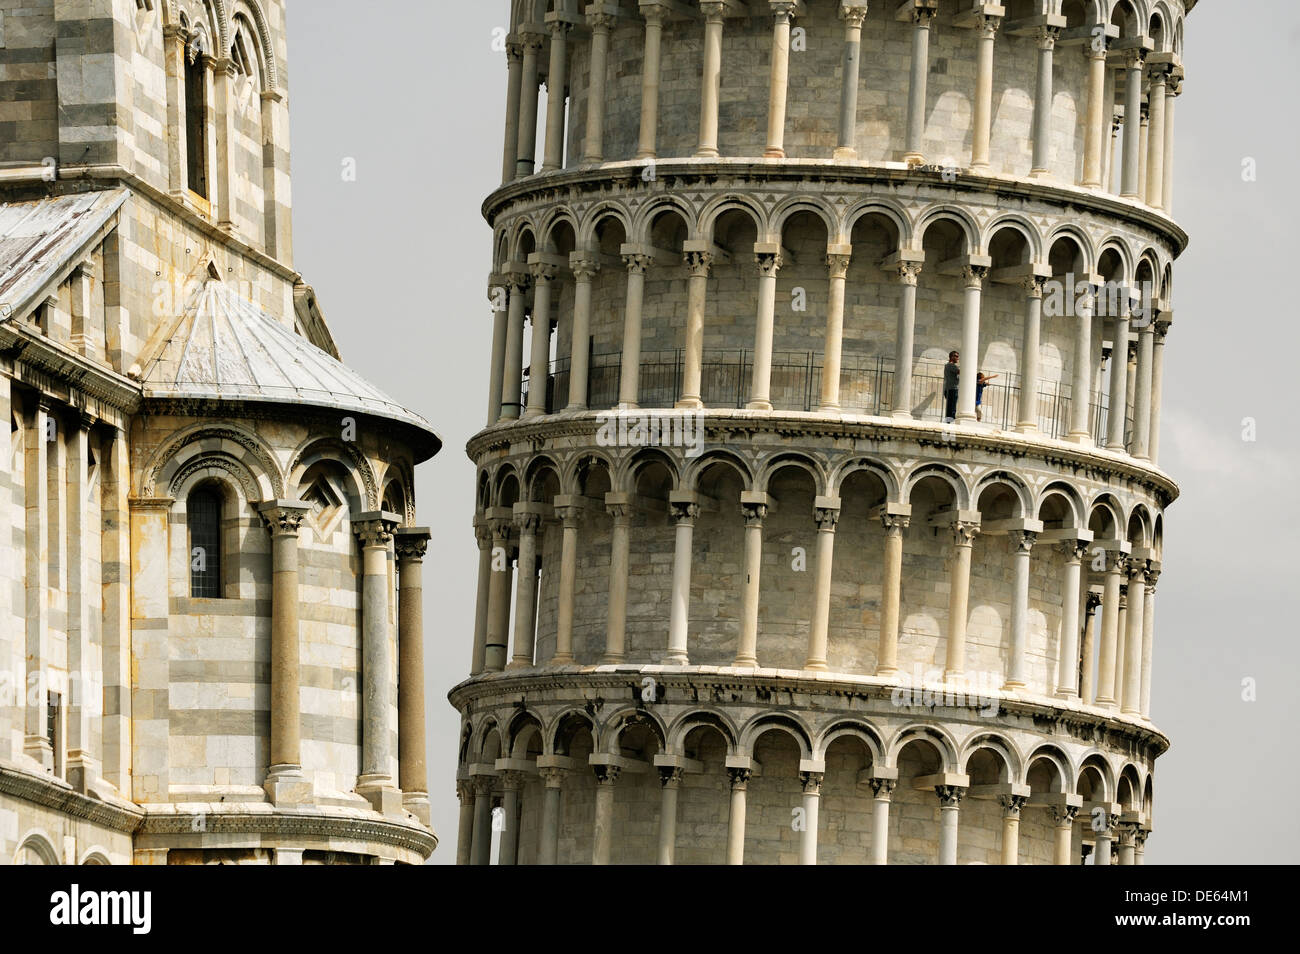 The Leaning Tower of Pisa angles away from the south transept of the Duomo in the Piazza dei Miracoli, Pisa, Tuscany, Italy Stock Photo